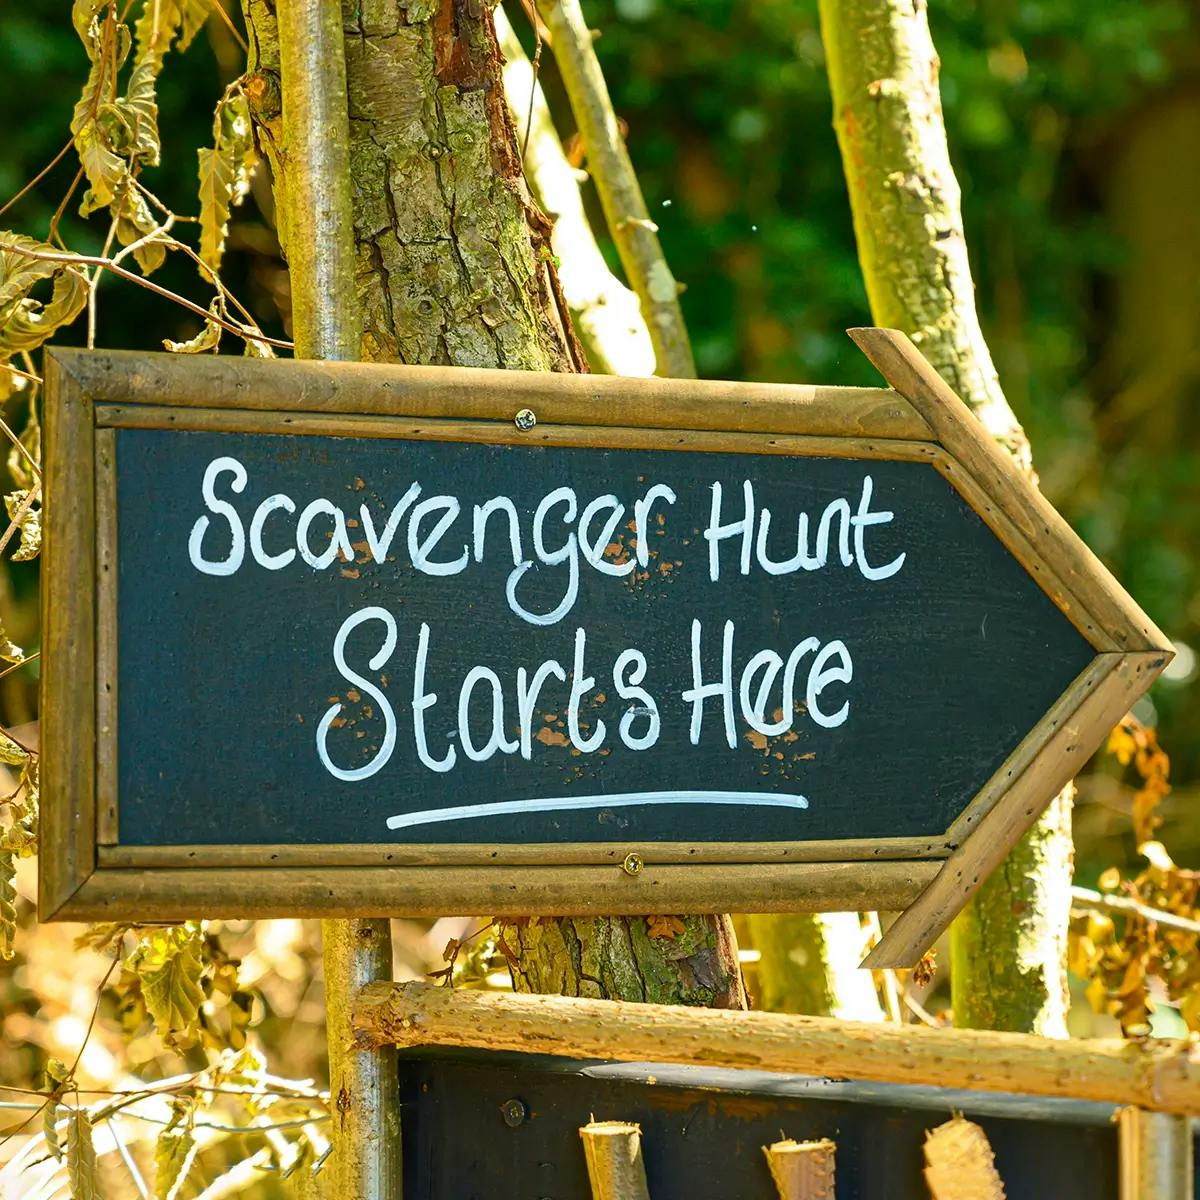 Scavenger Hunt Starts Here sign attached to tree in the woods.